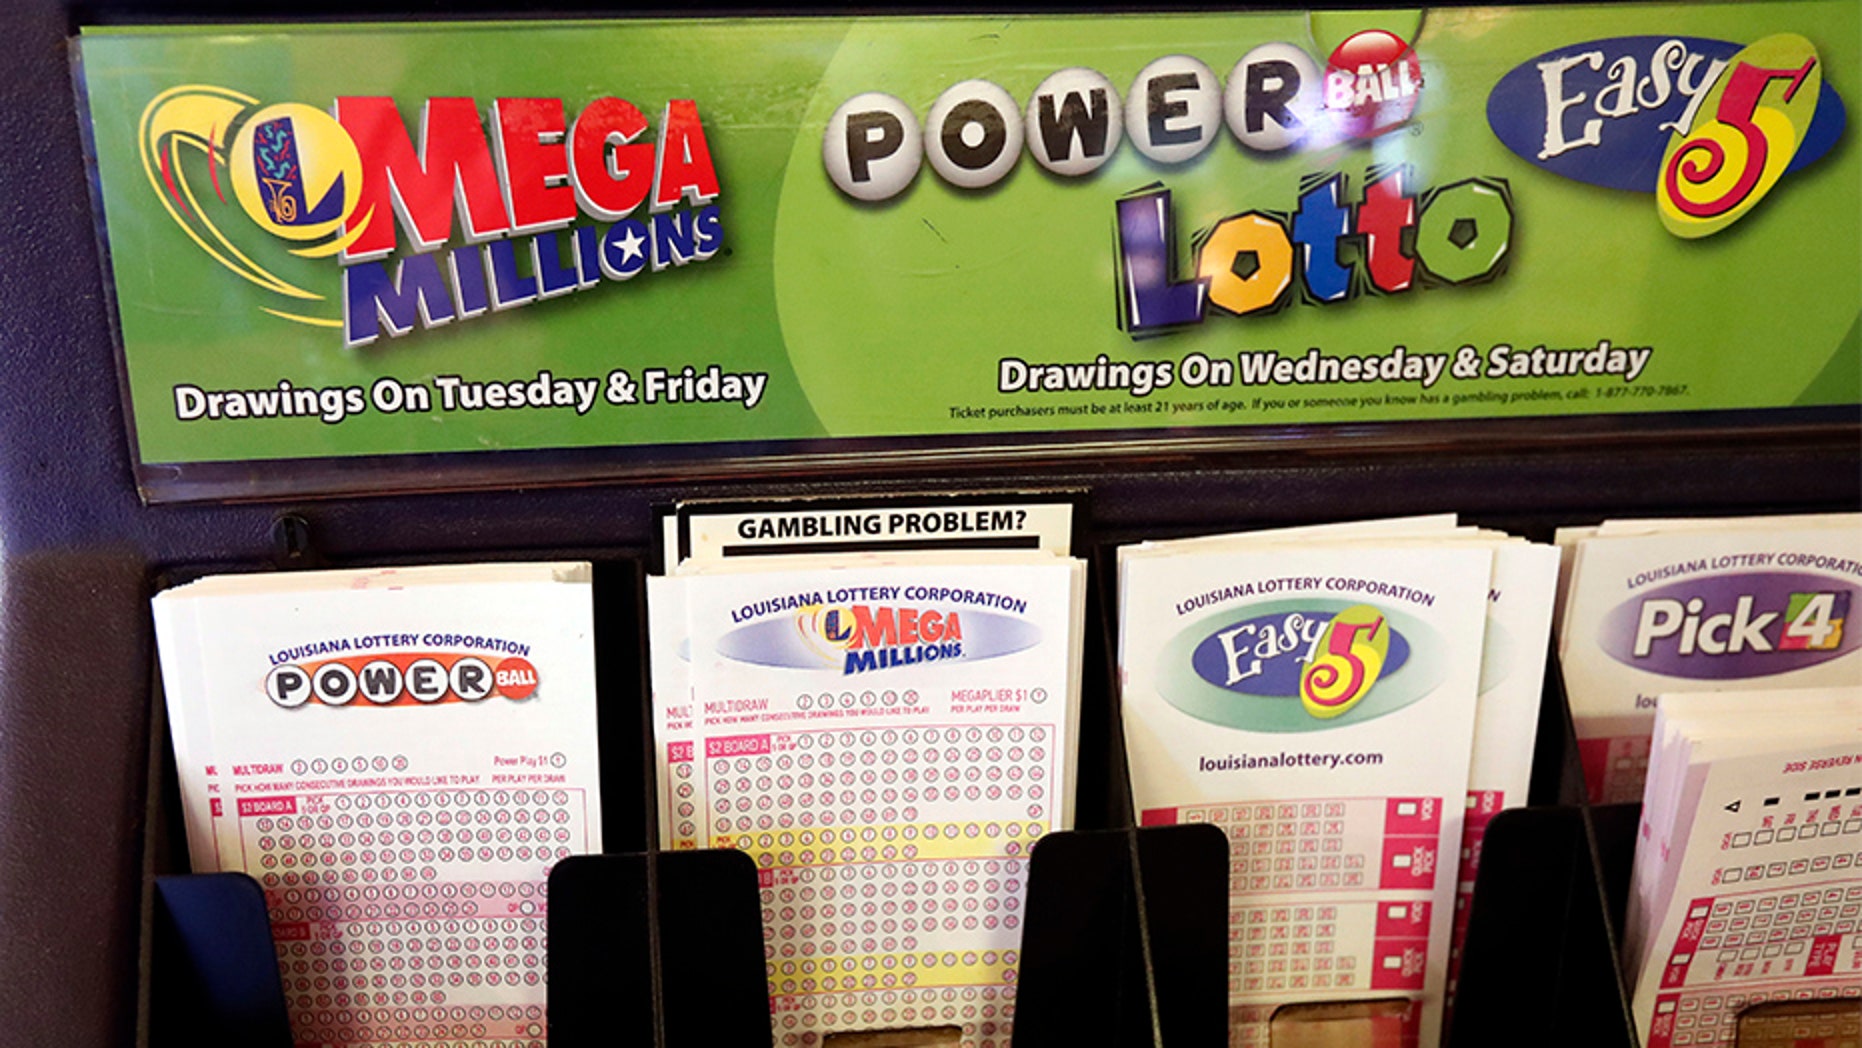 Powerball jackpot soars to 750 million as lottery mania continues in